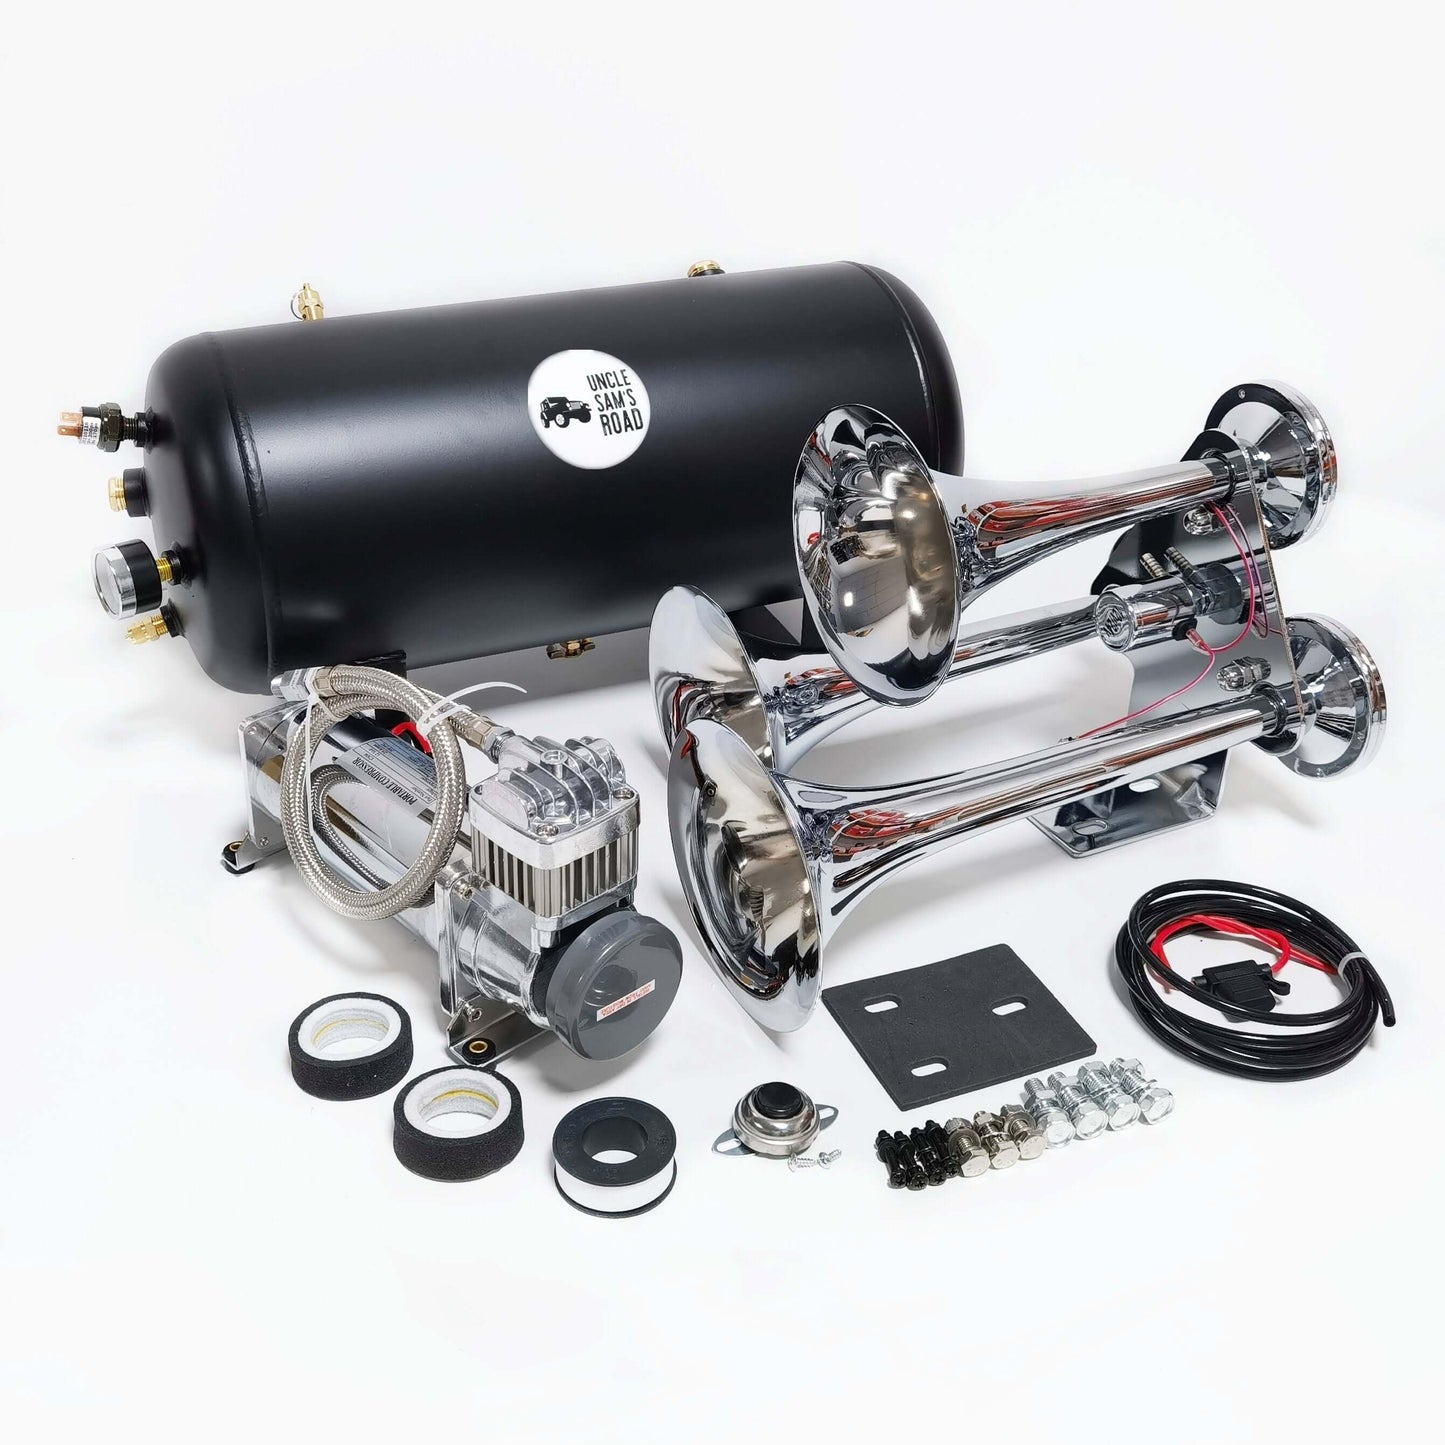 [UNIQUE OFFER] Hurricane 5Gal Train Horn Kit 10-Second Honk Time 